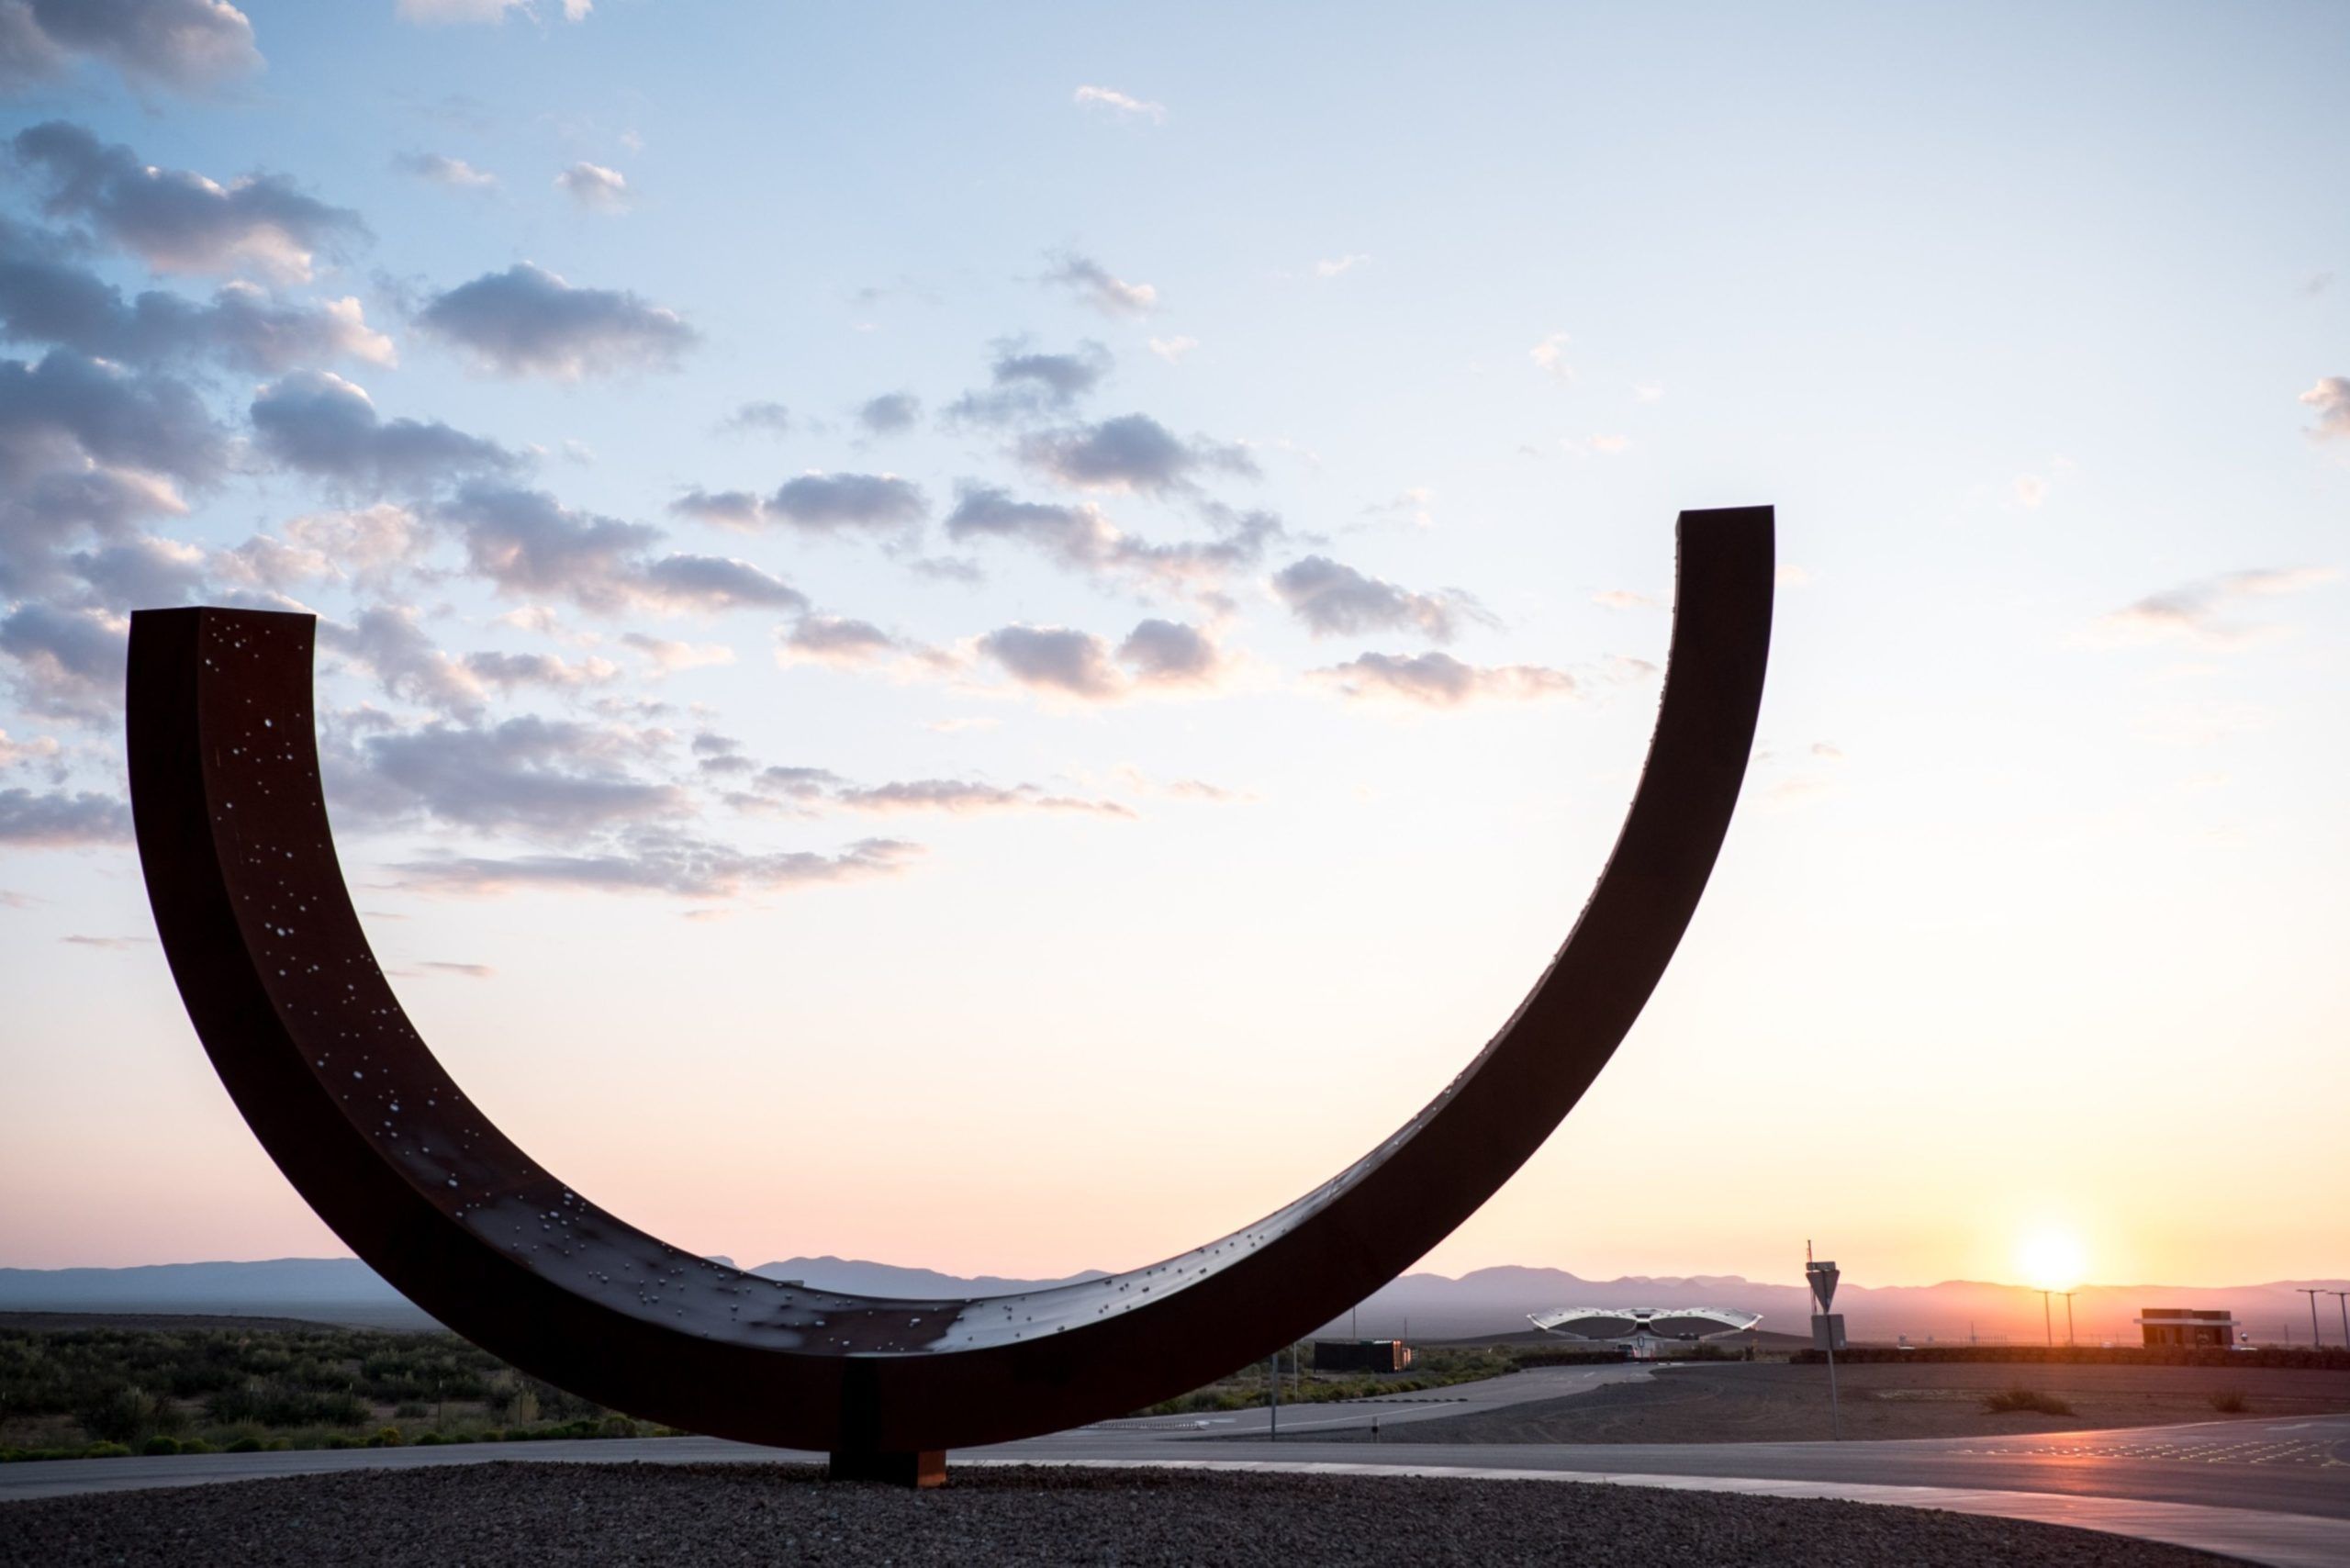 The 'Genesis' sculpture at the entrance to Spaceport America in Truth or Consequences, New Mexico, U.S., on Wednesday, Sept. 16, 2020. 